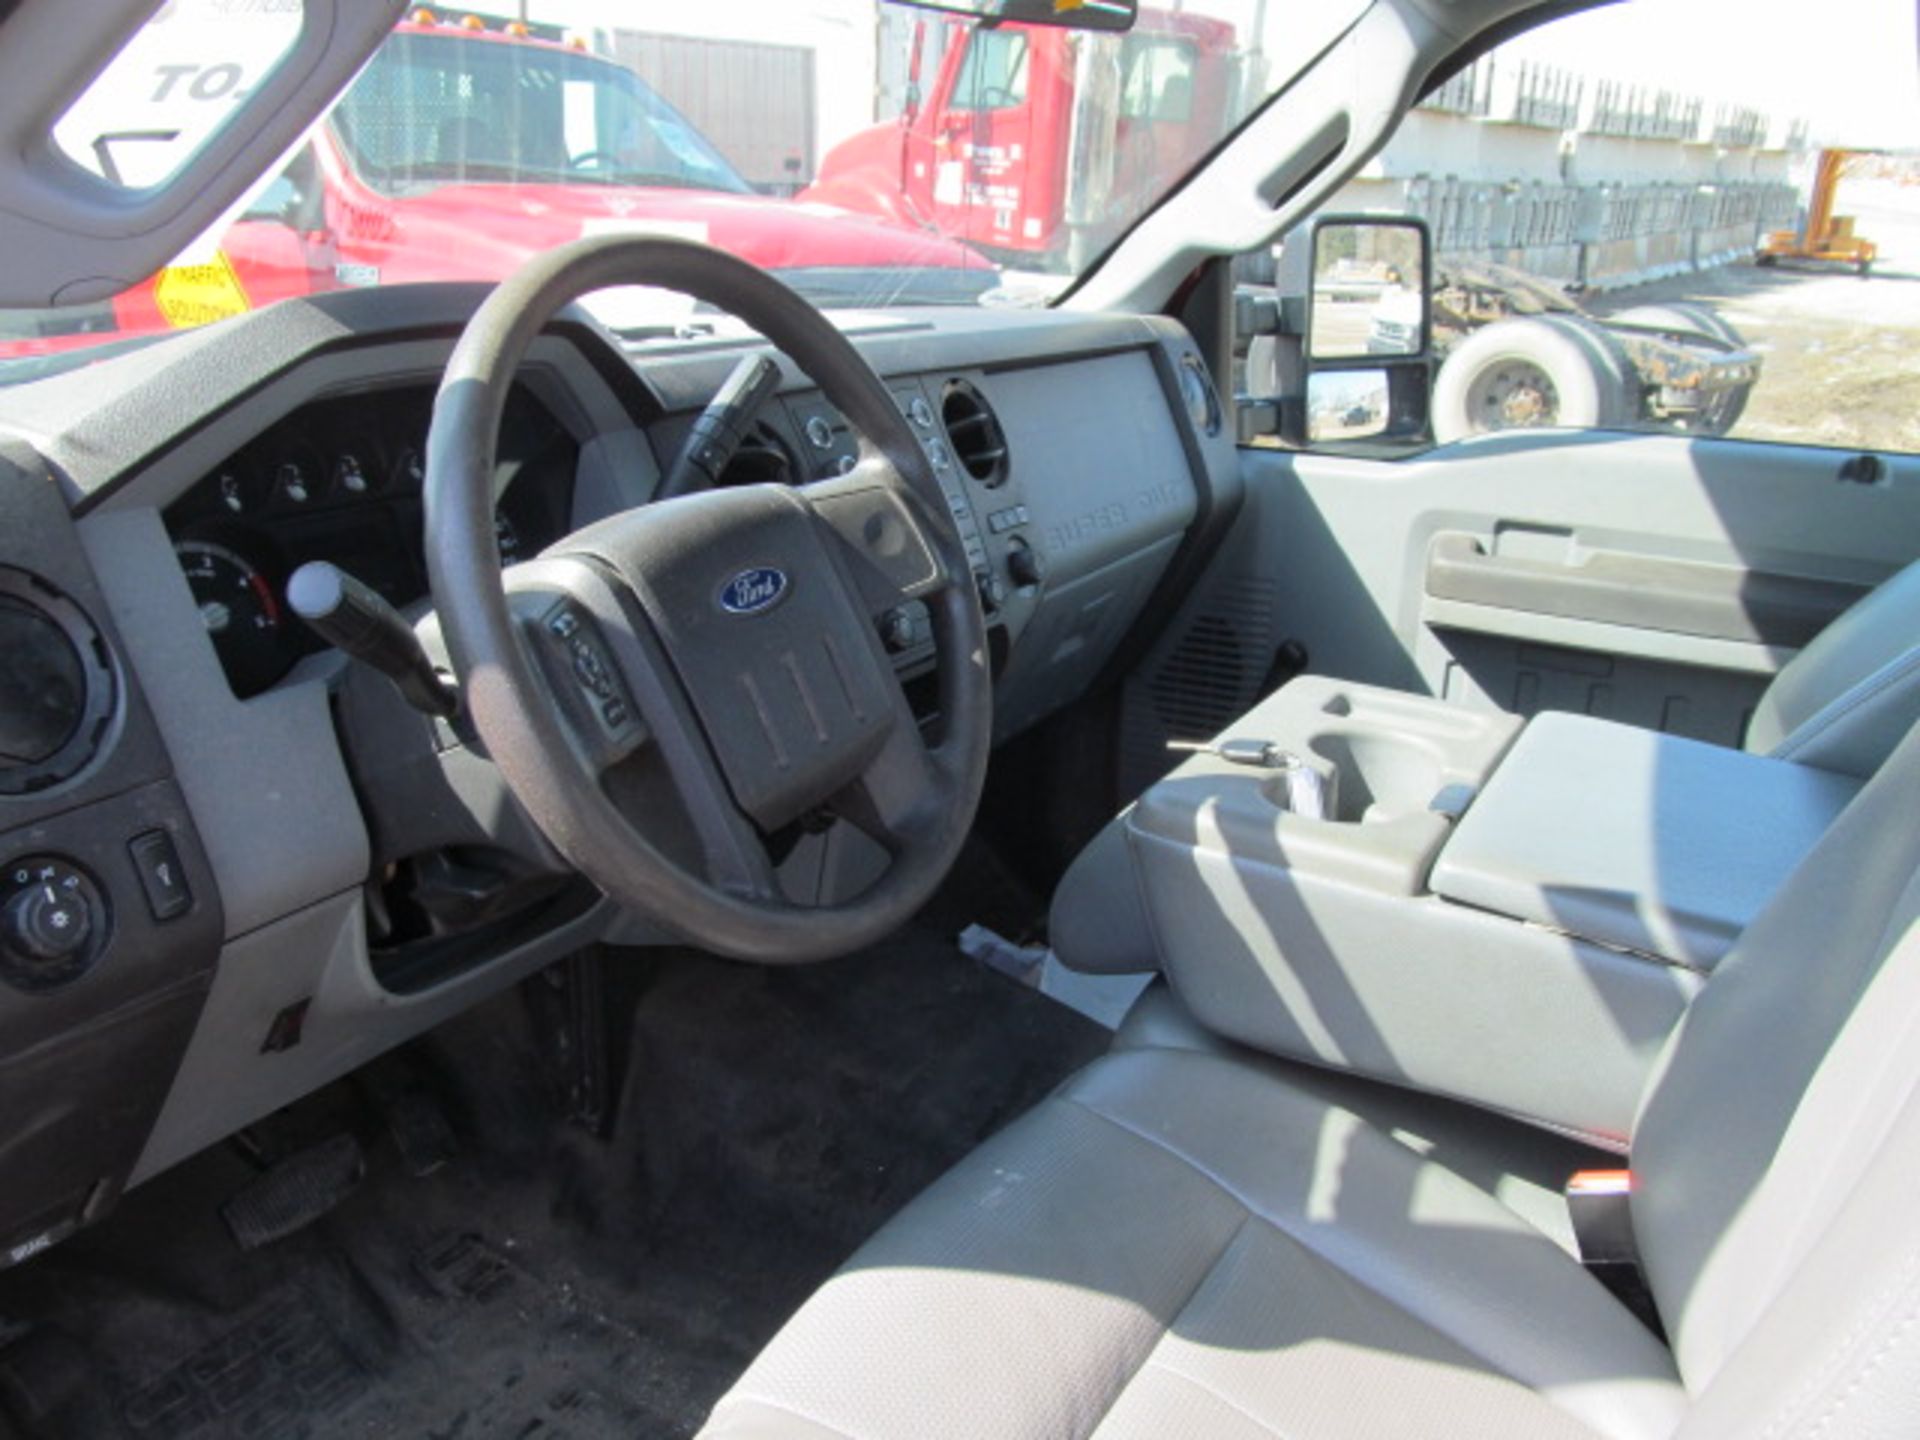 2014 Ford F250 Pickup Truck (VIN: 1FTBF2AT9EEA13237)[Estimated Mileage: 115,149] (Subject To - Image 4 of 4